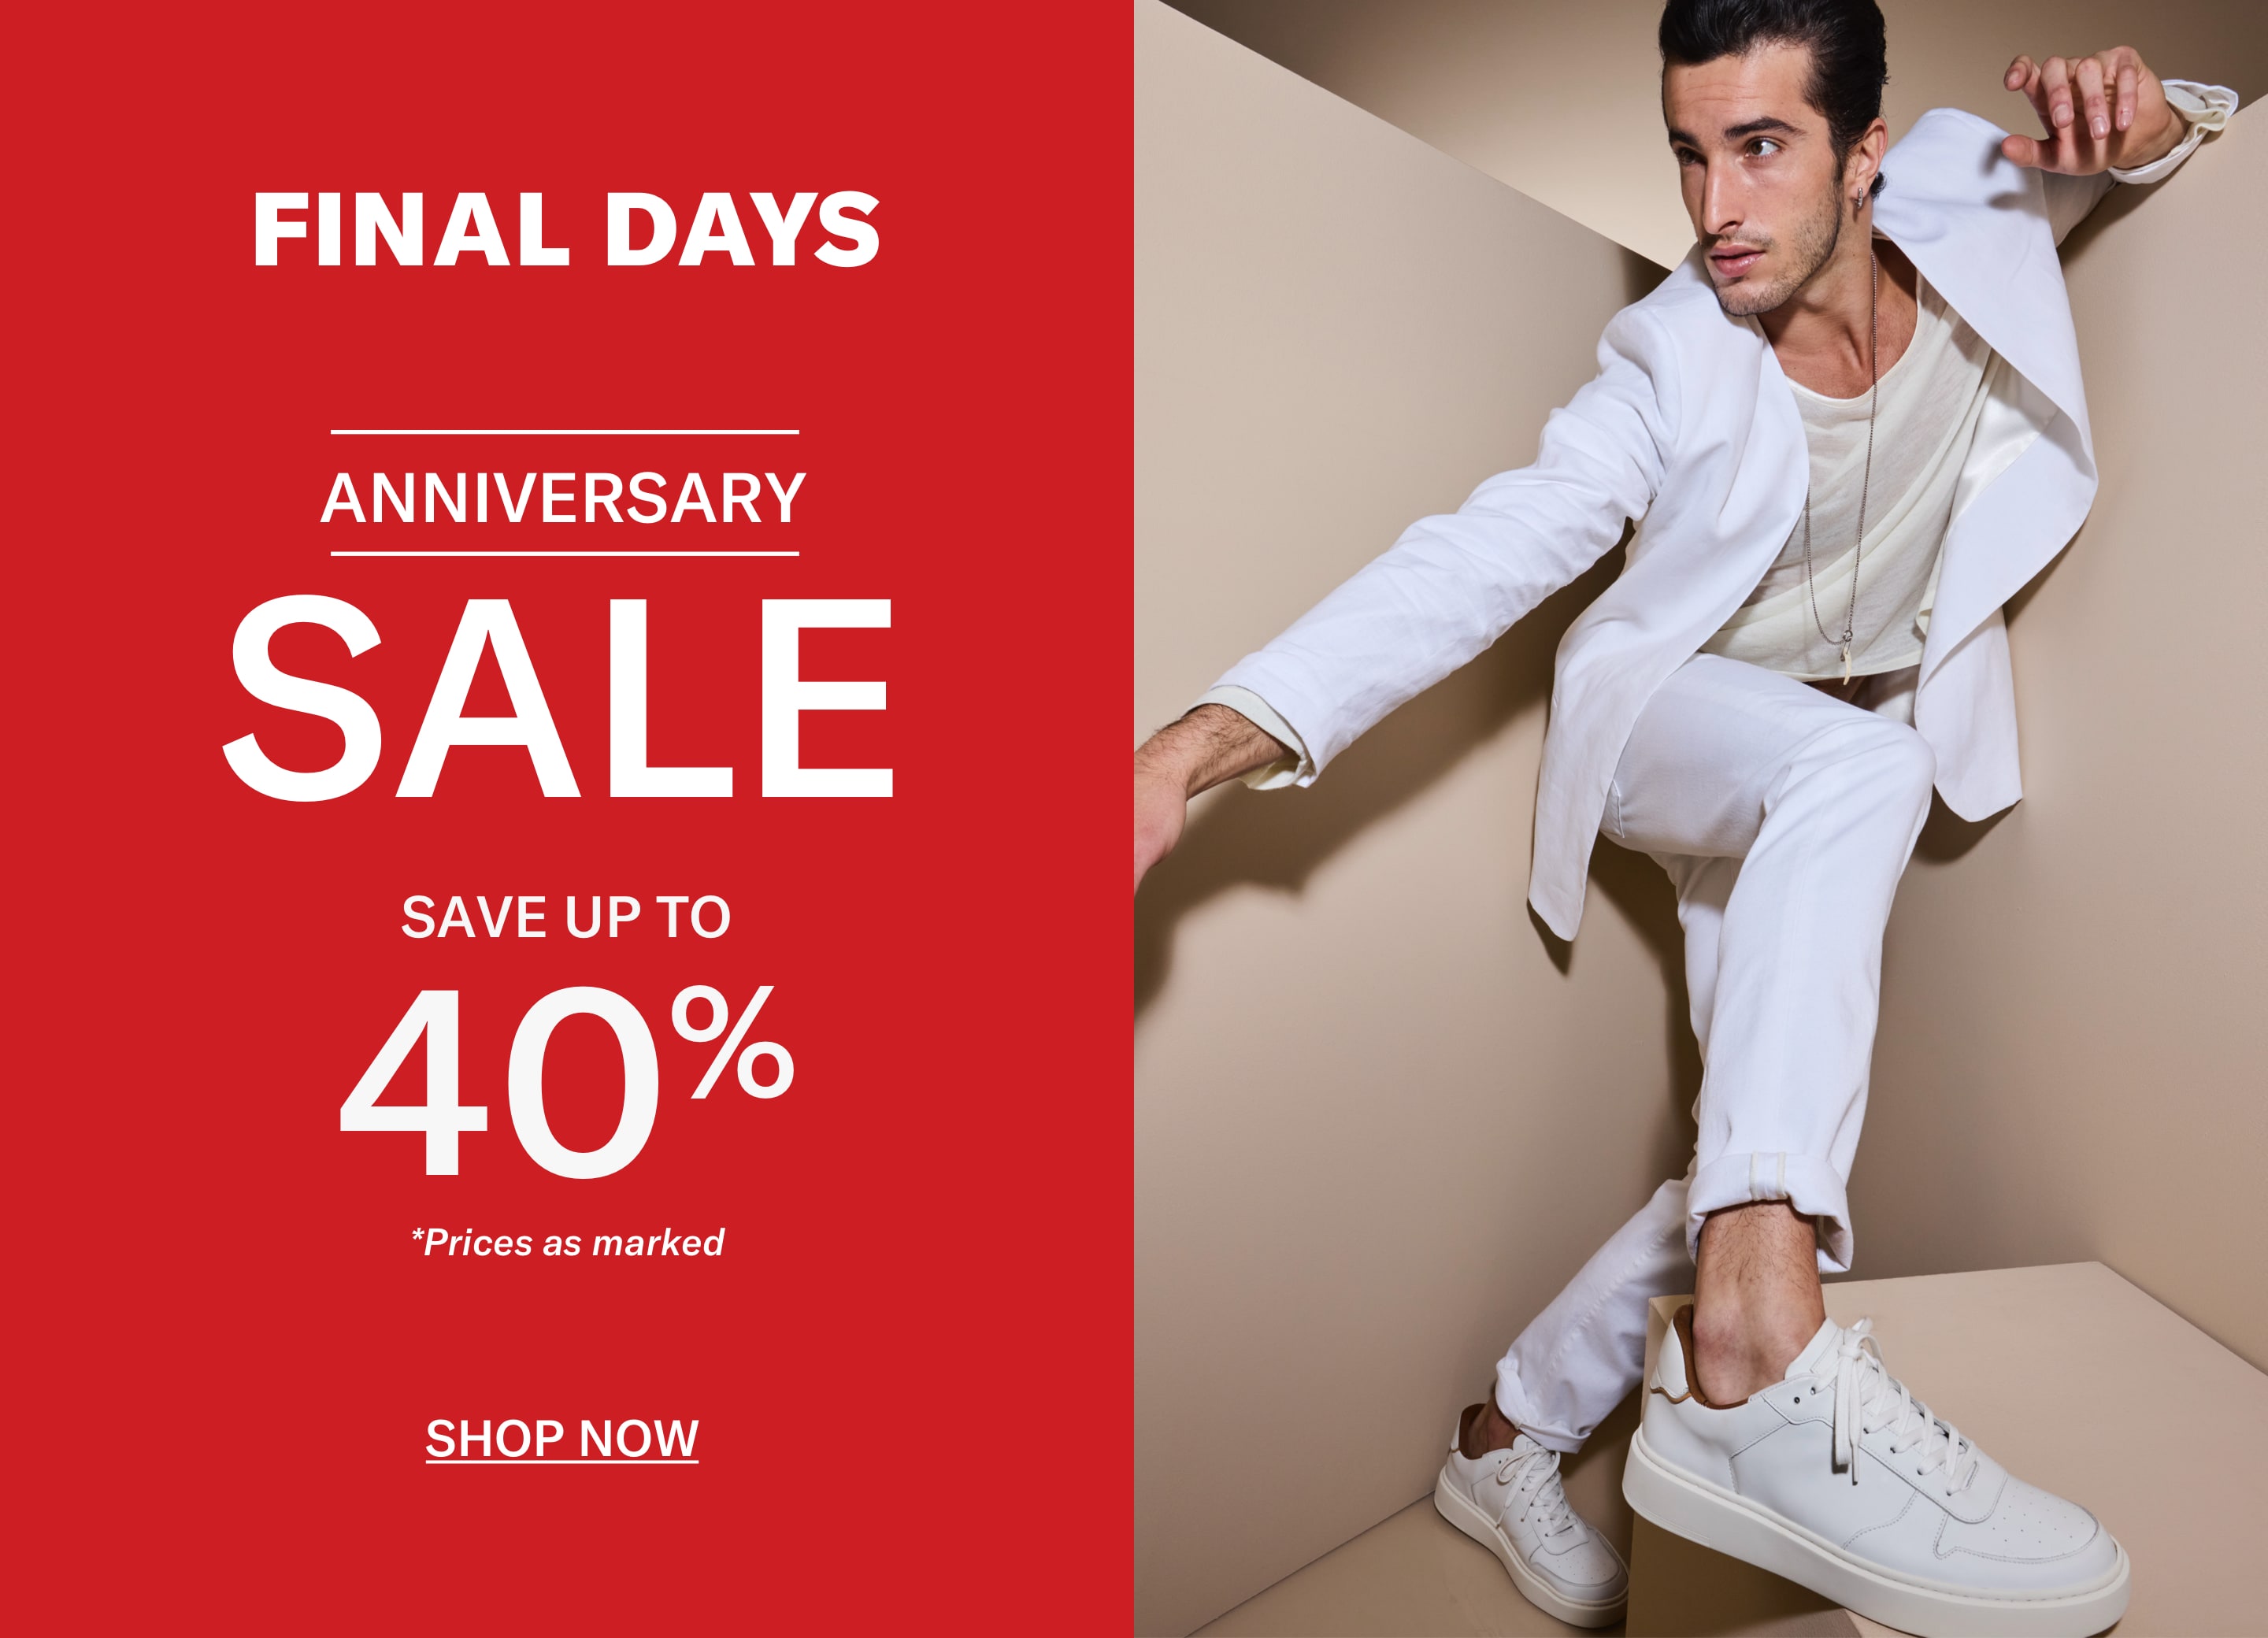 Final Days | Save up to 40% Off | Anniversary Sale